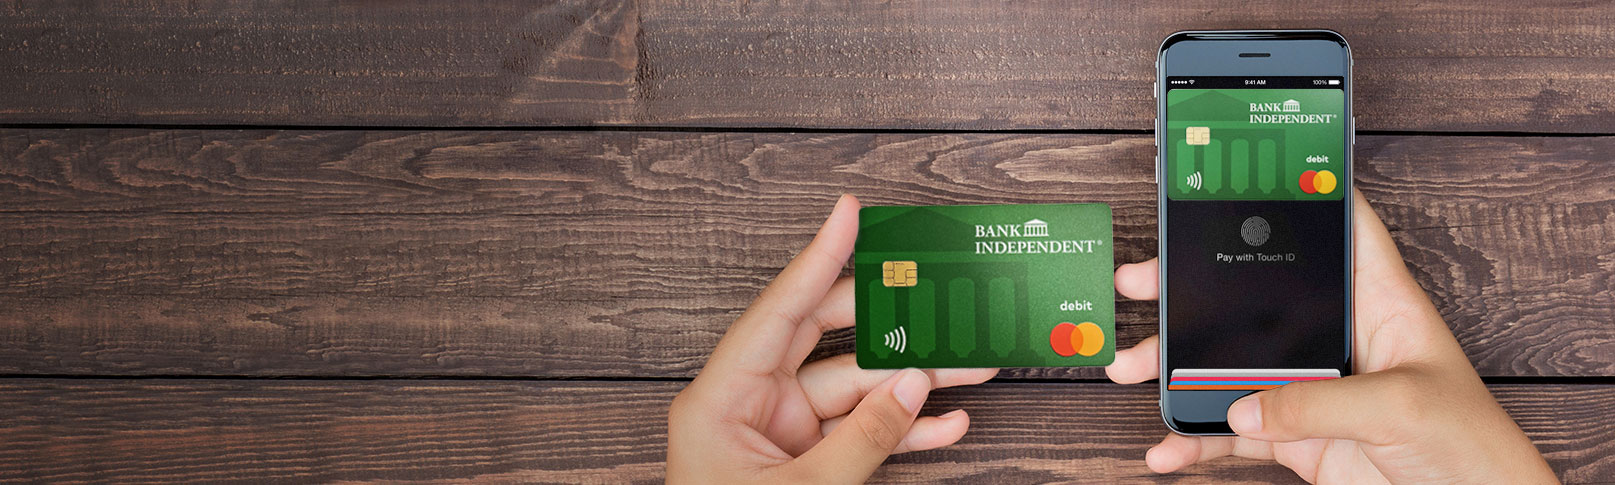 Personal Debit Cards For Payment Convenience - Bank Independent